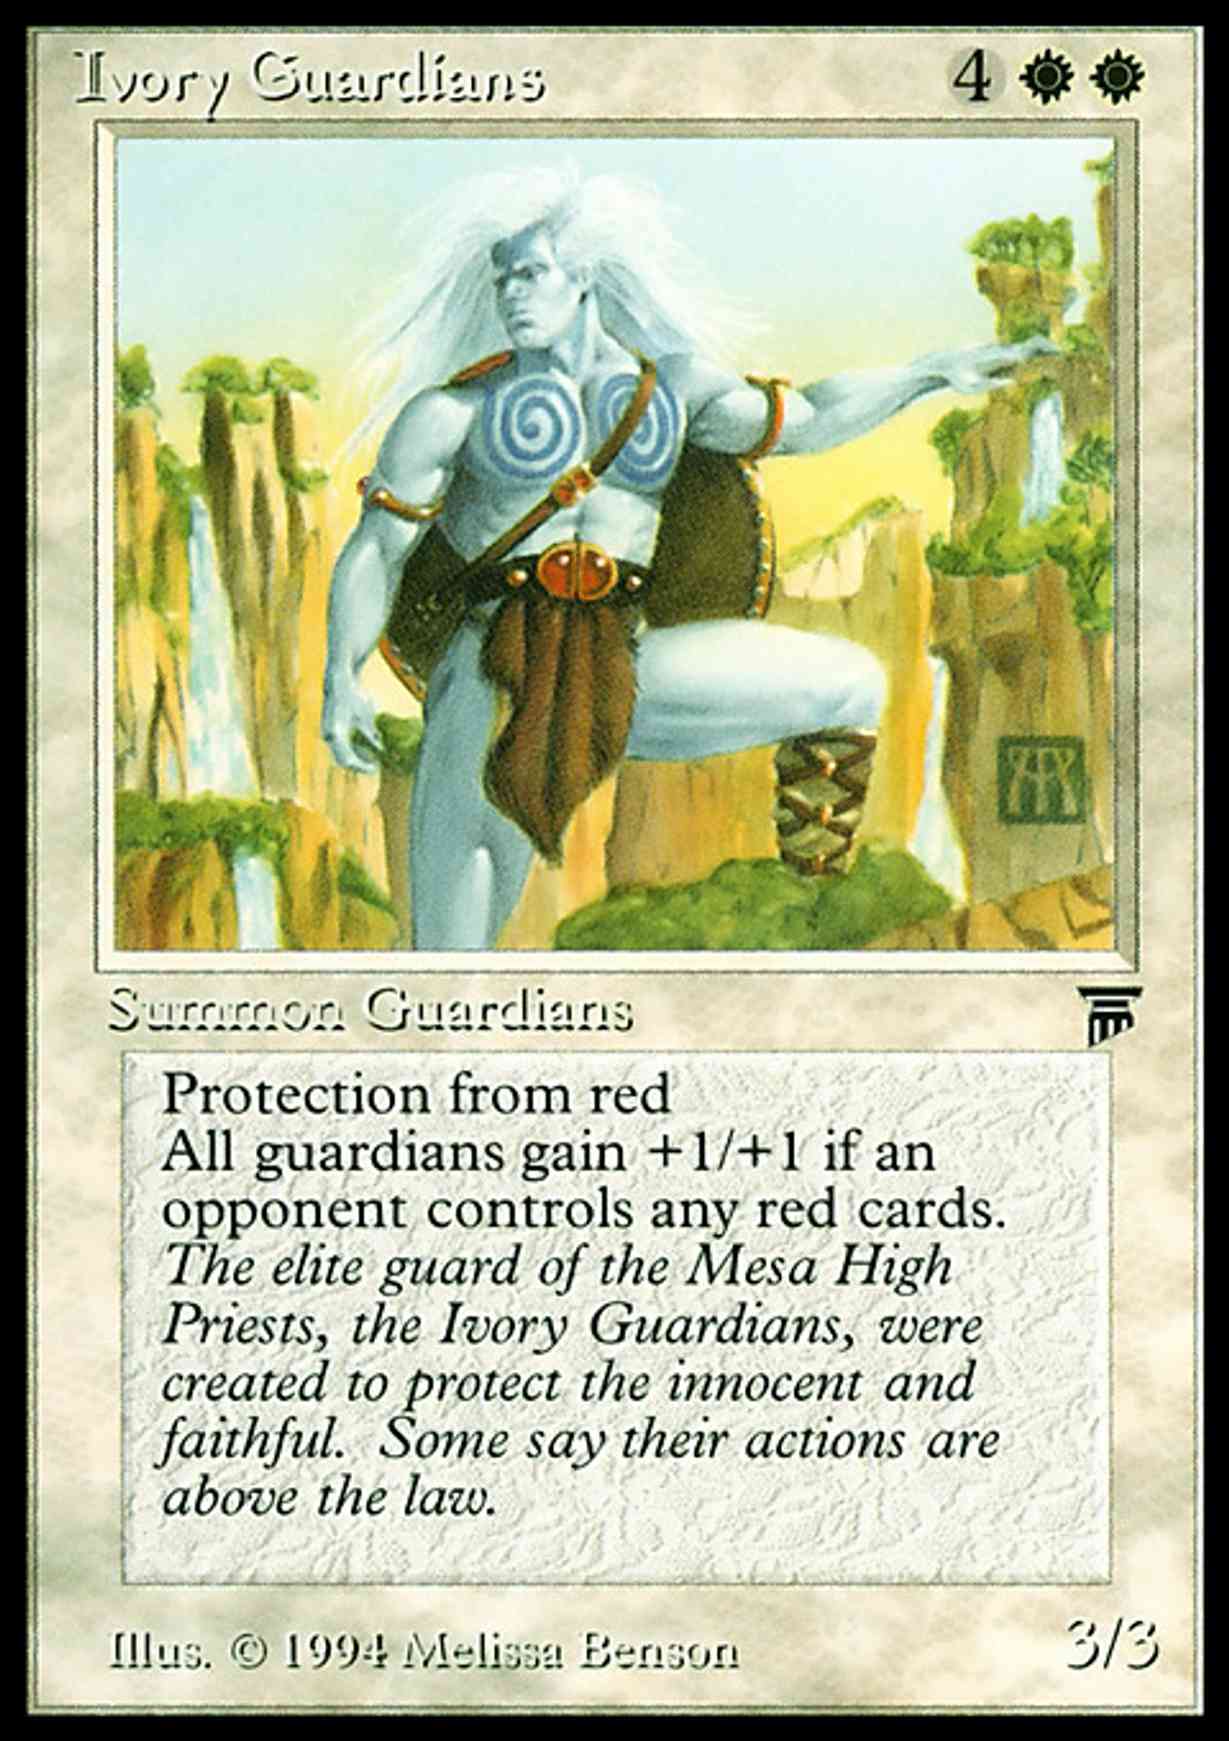 Ivory Guardians magic card front